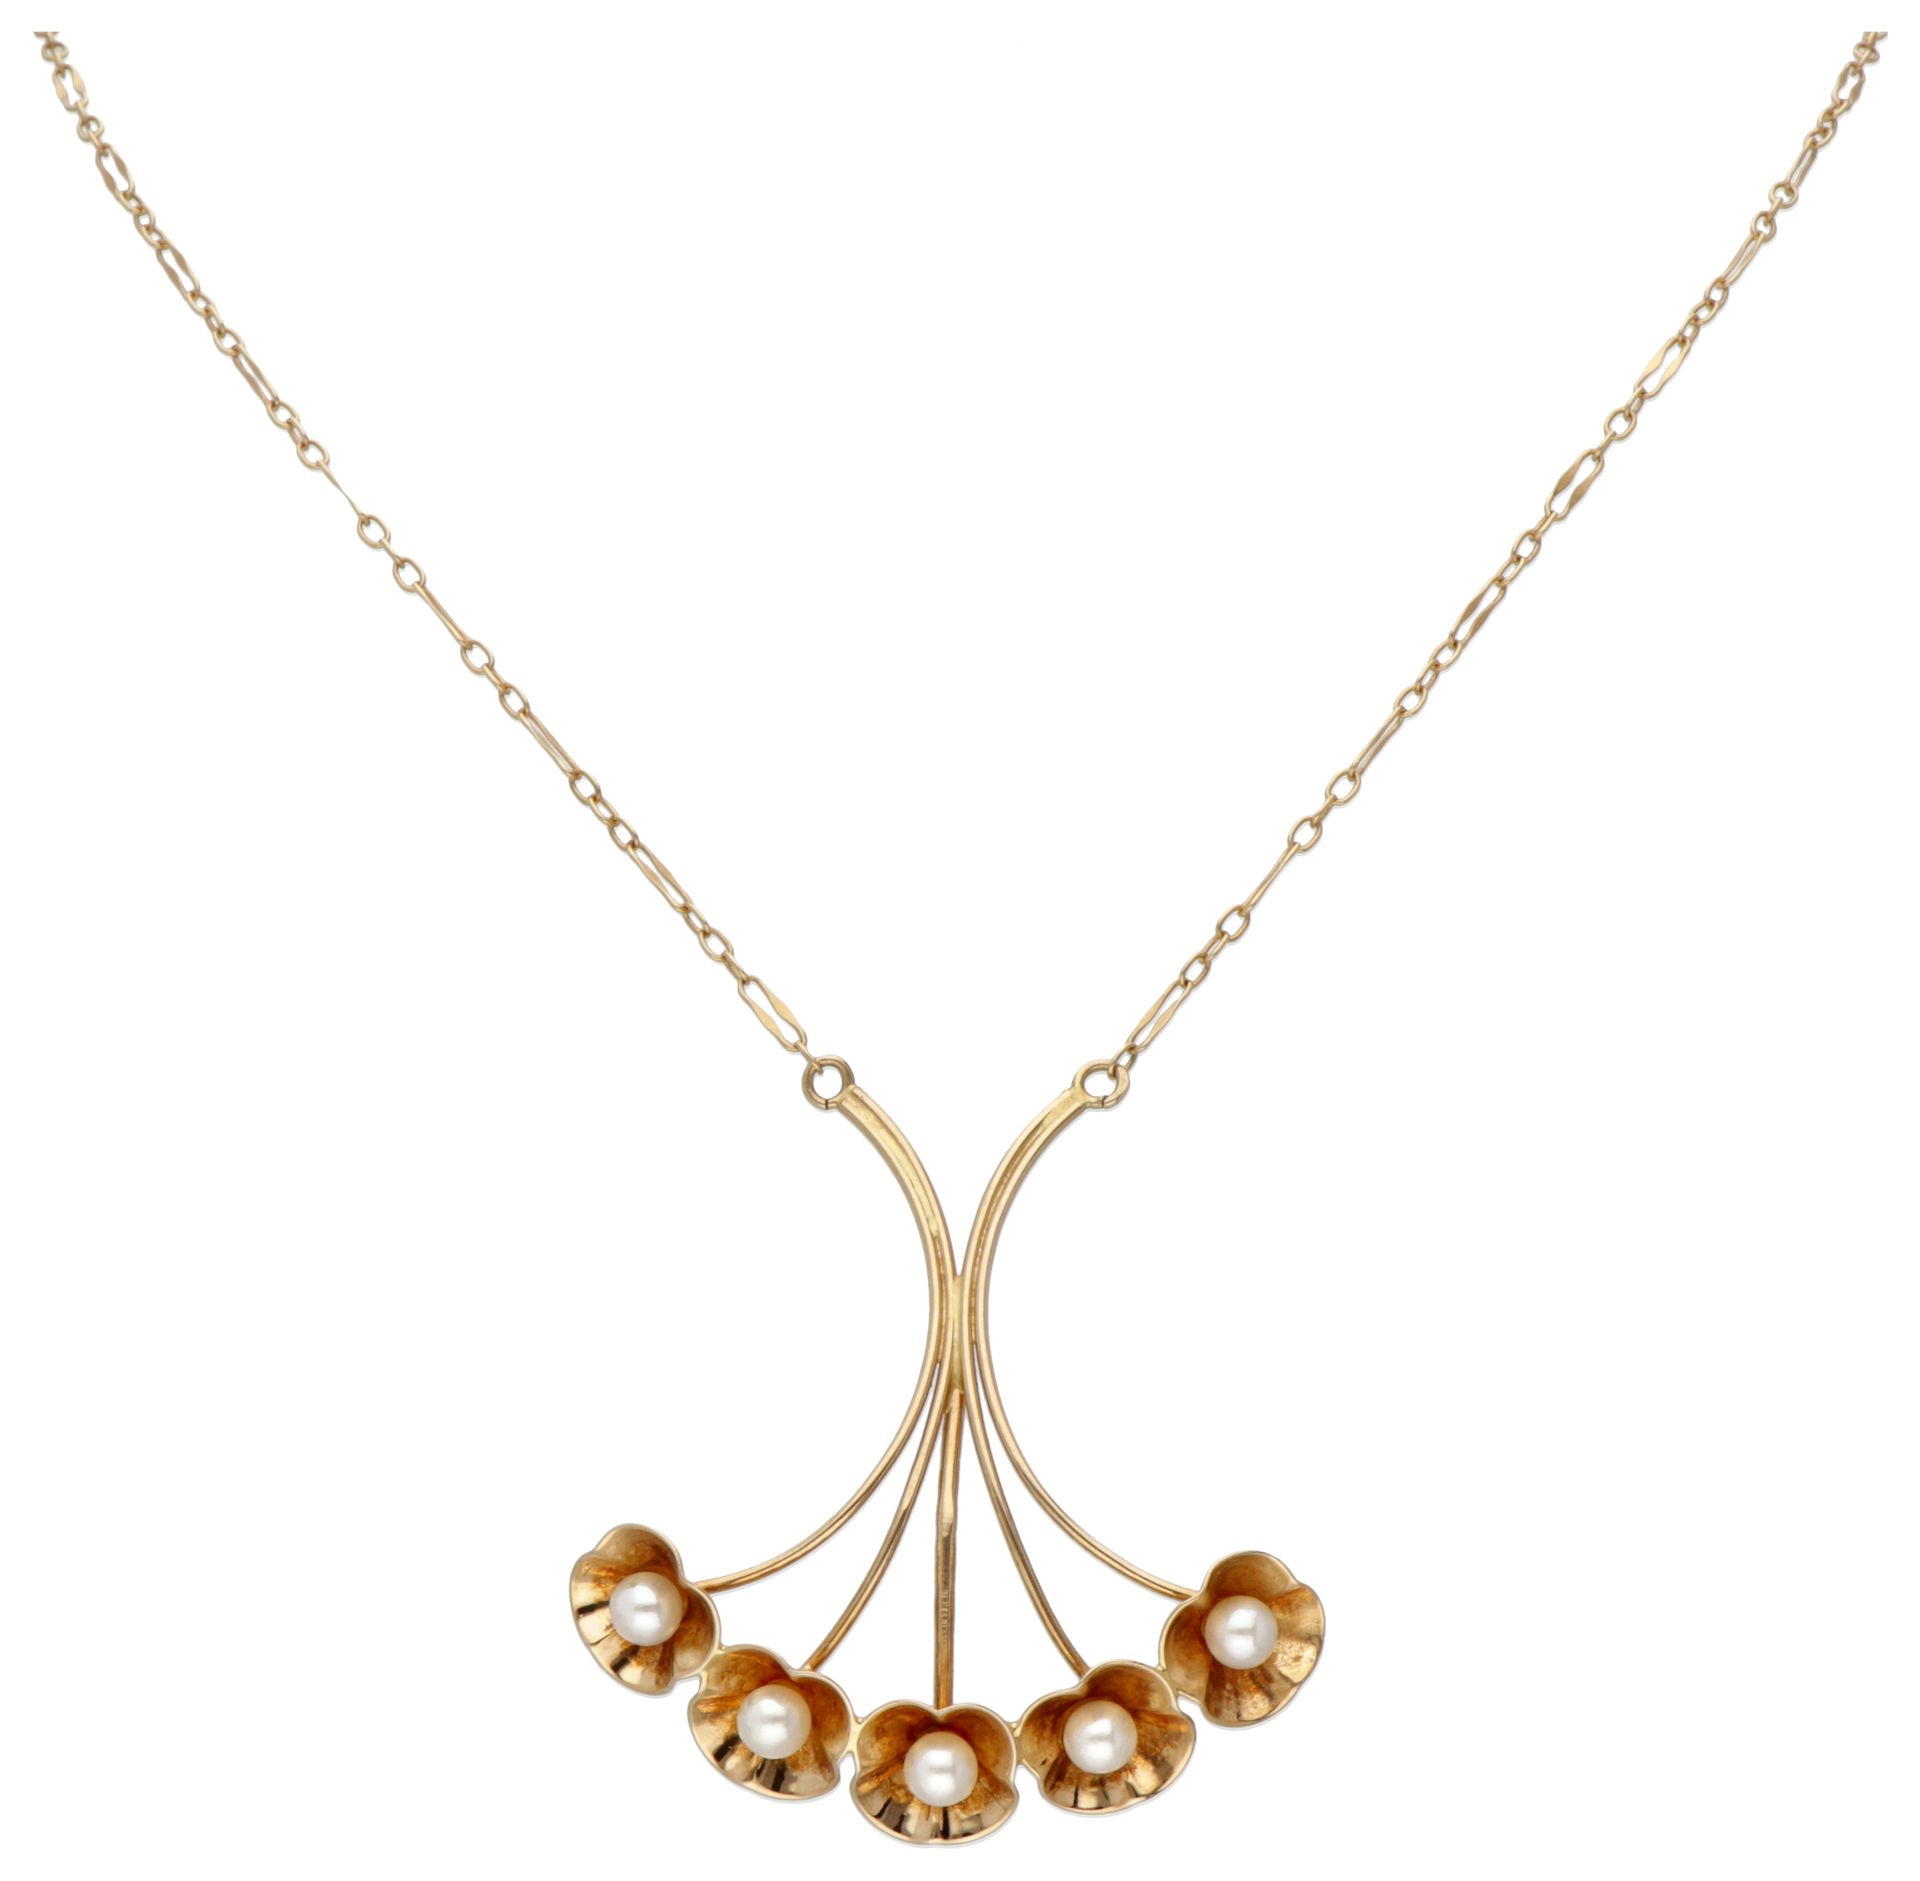 18K. Yellow gold Alton necklace and pendant set with pearls. Sellos: 750, Alton,&hellip;